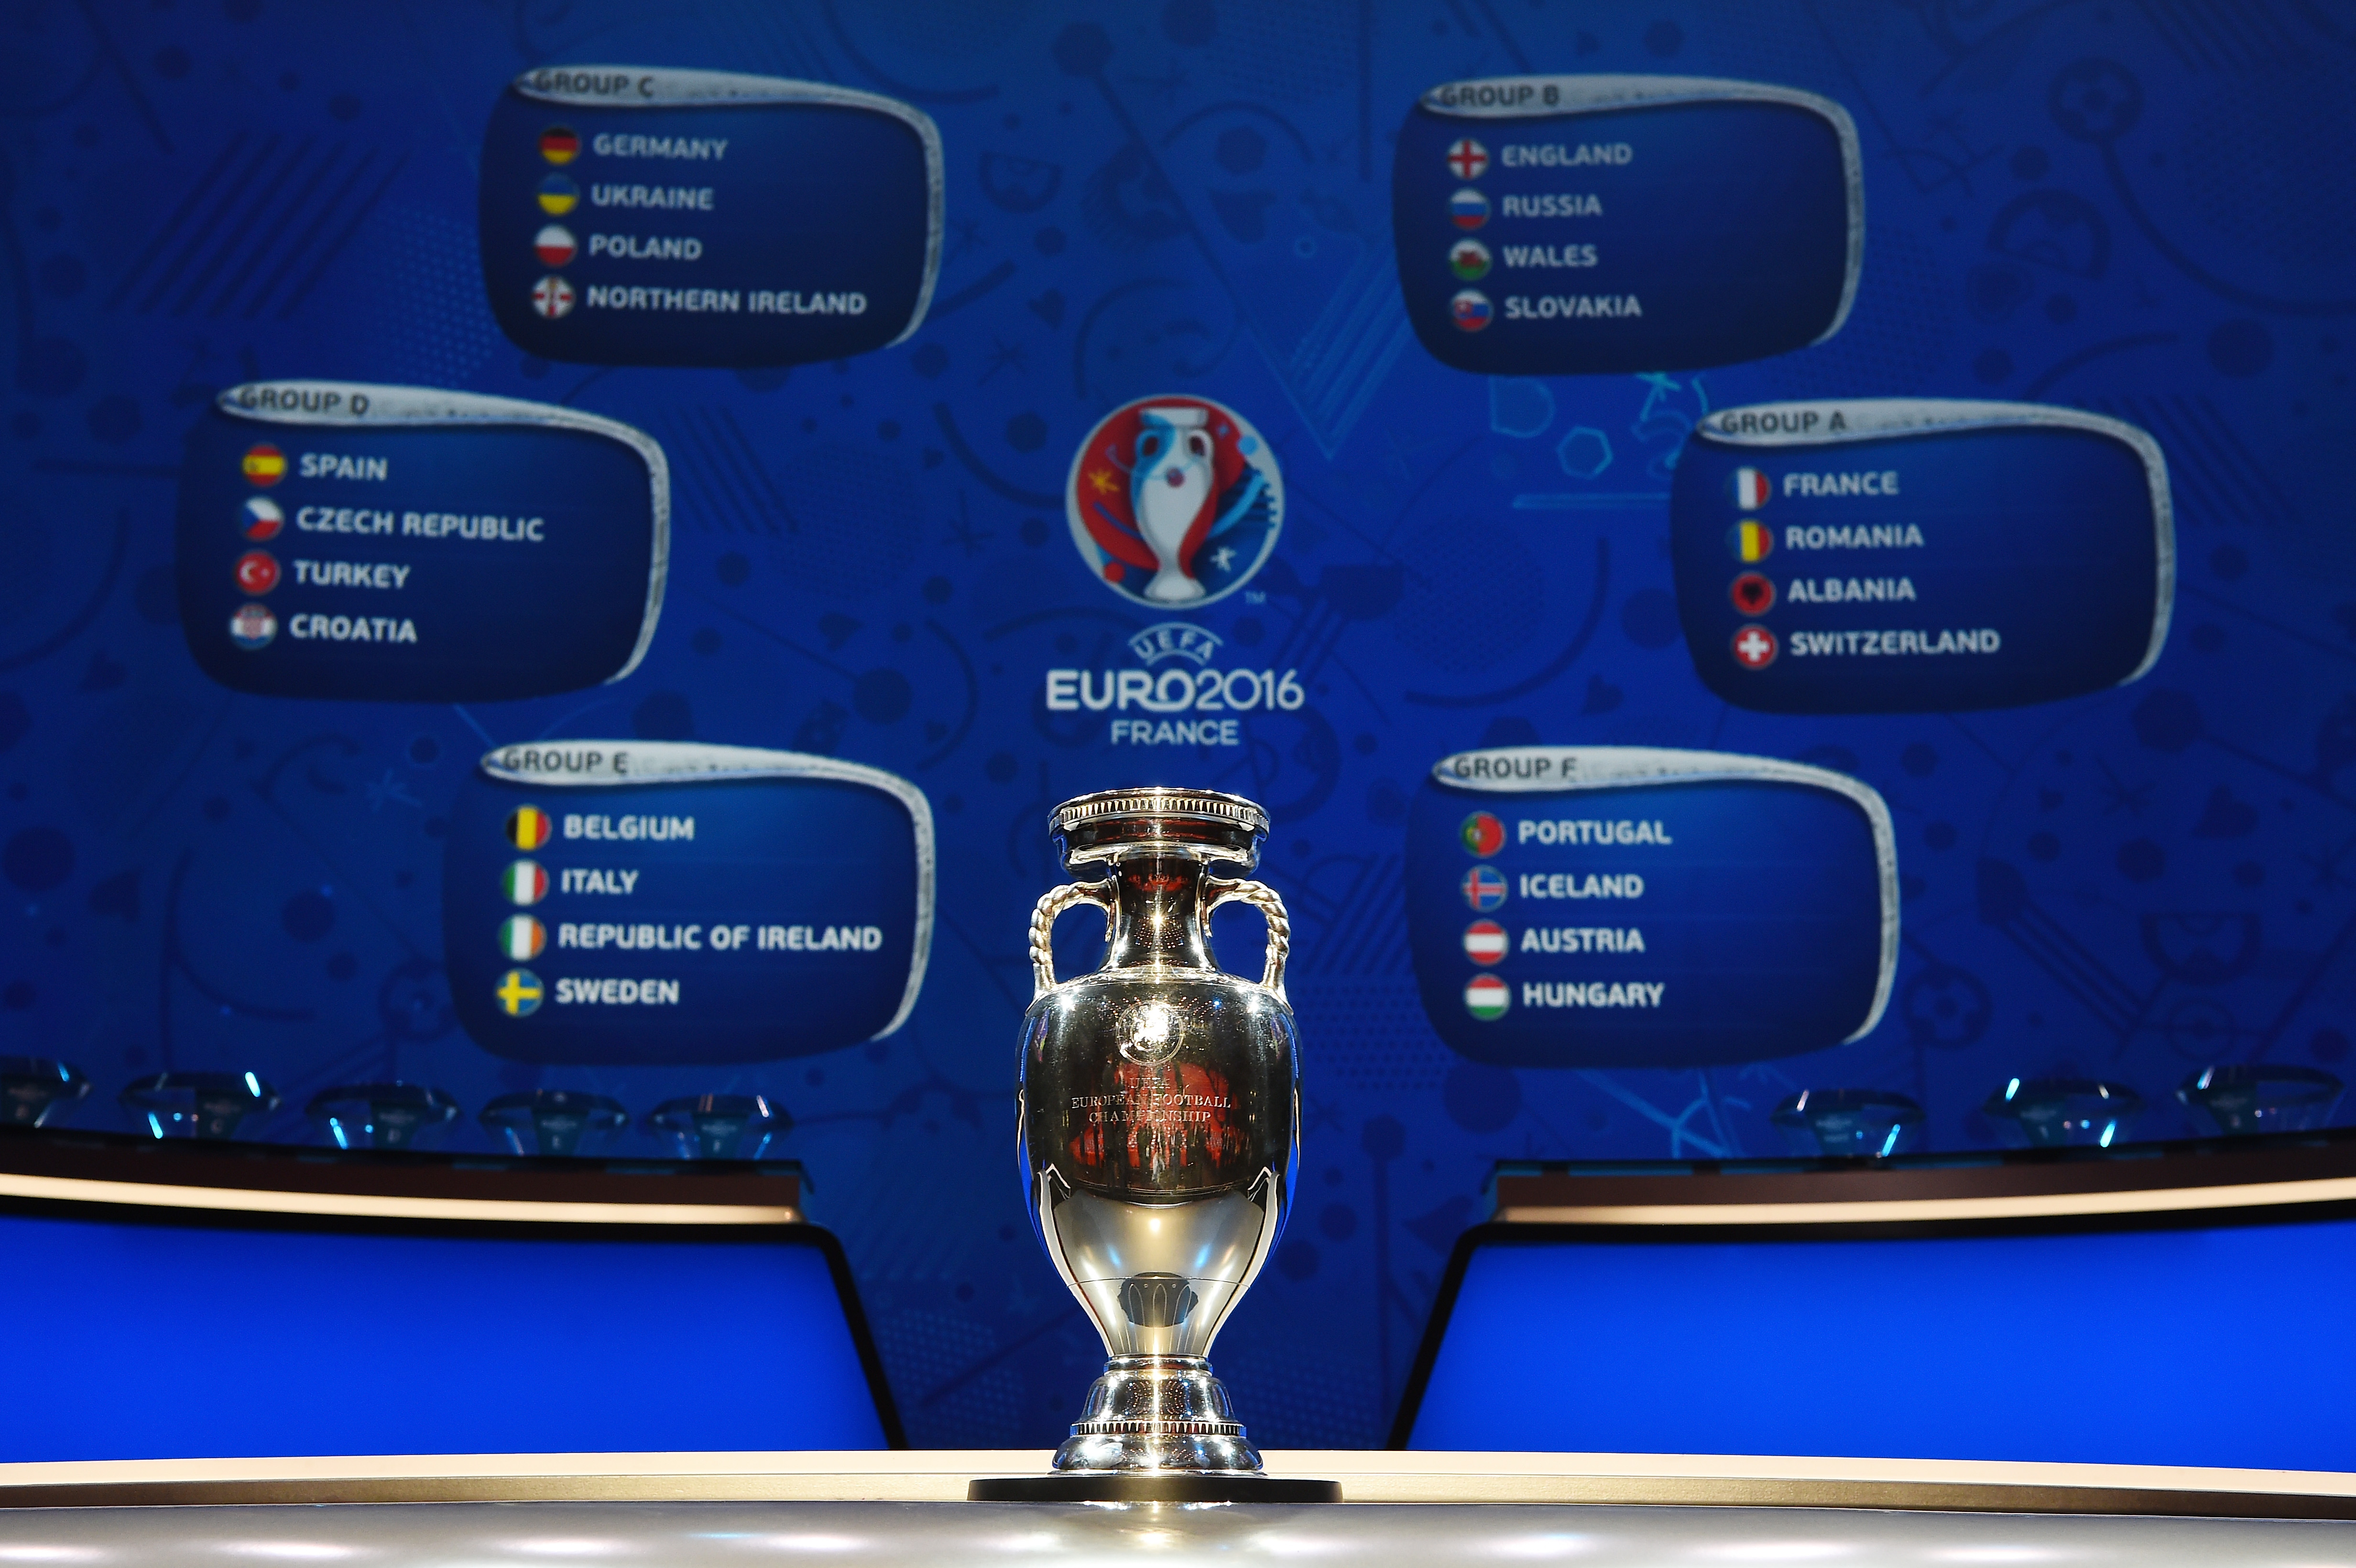 Euro 2016 | Find out who Goldman Sachs would place their money on